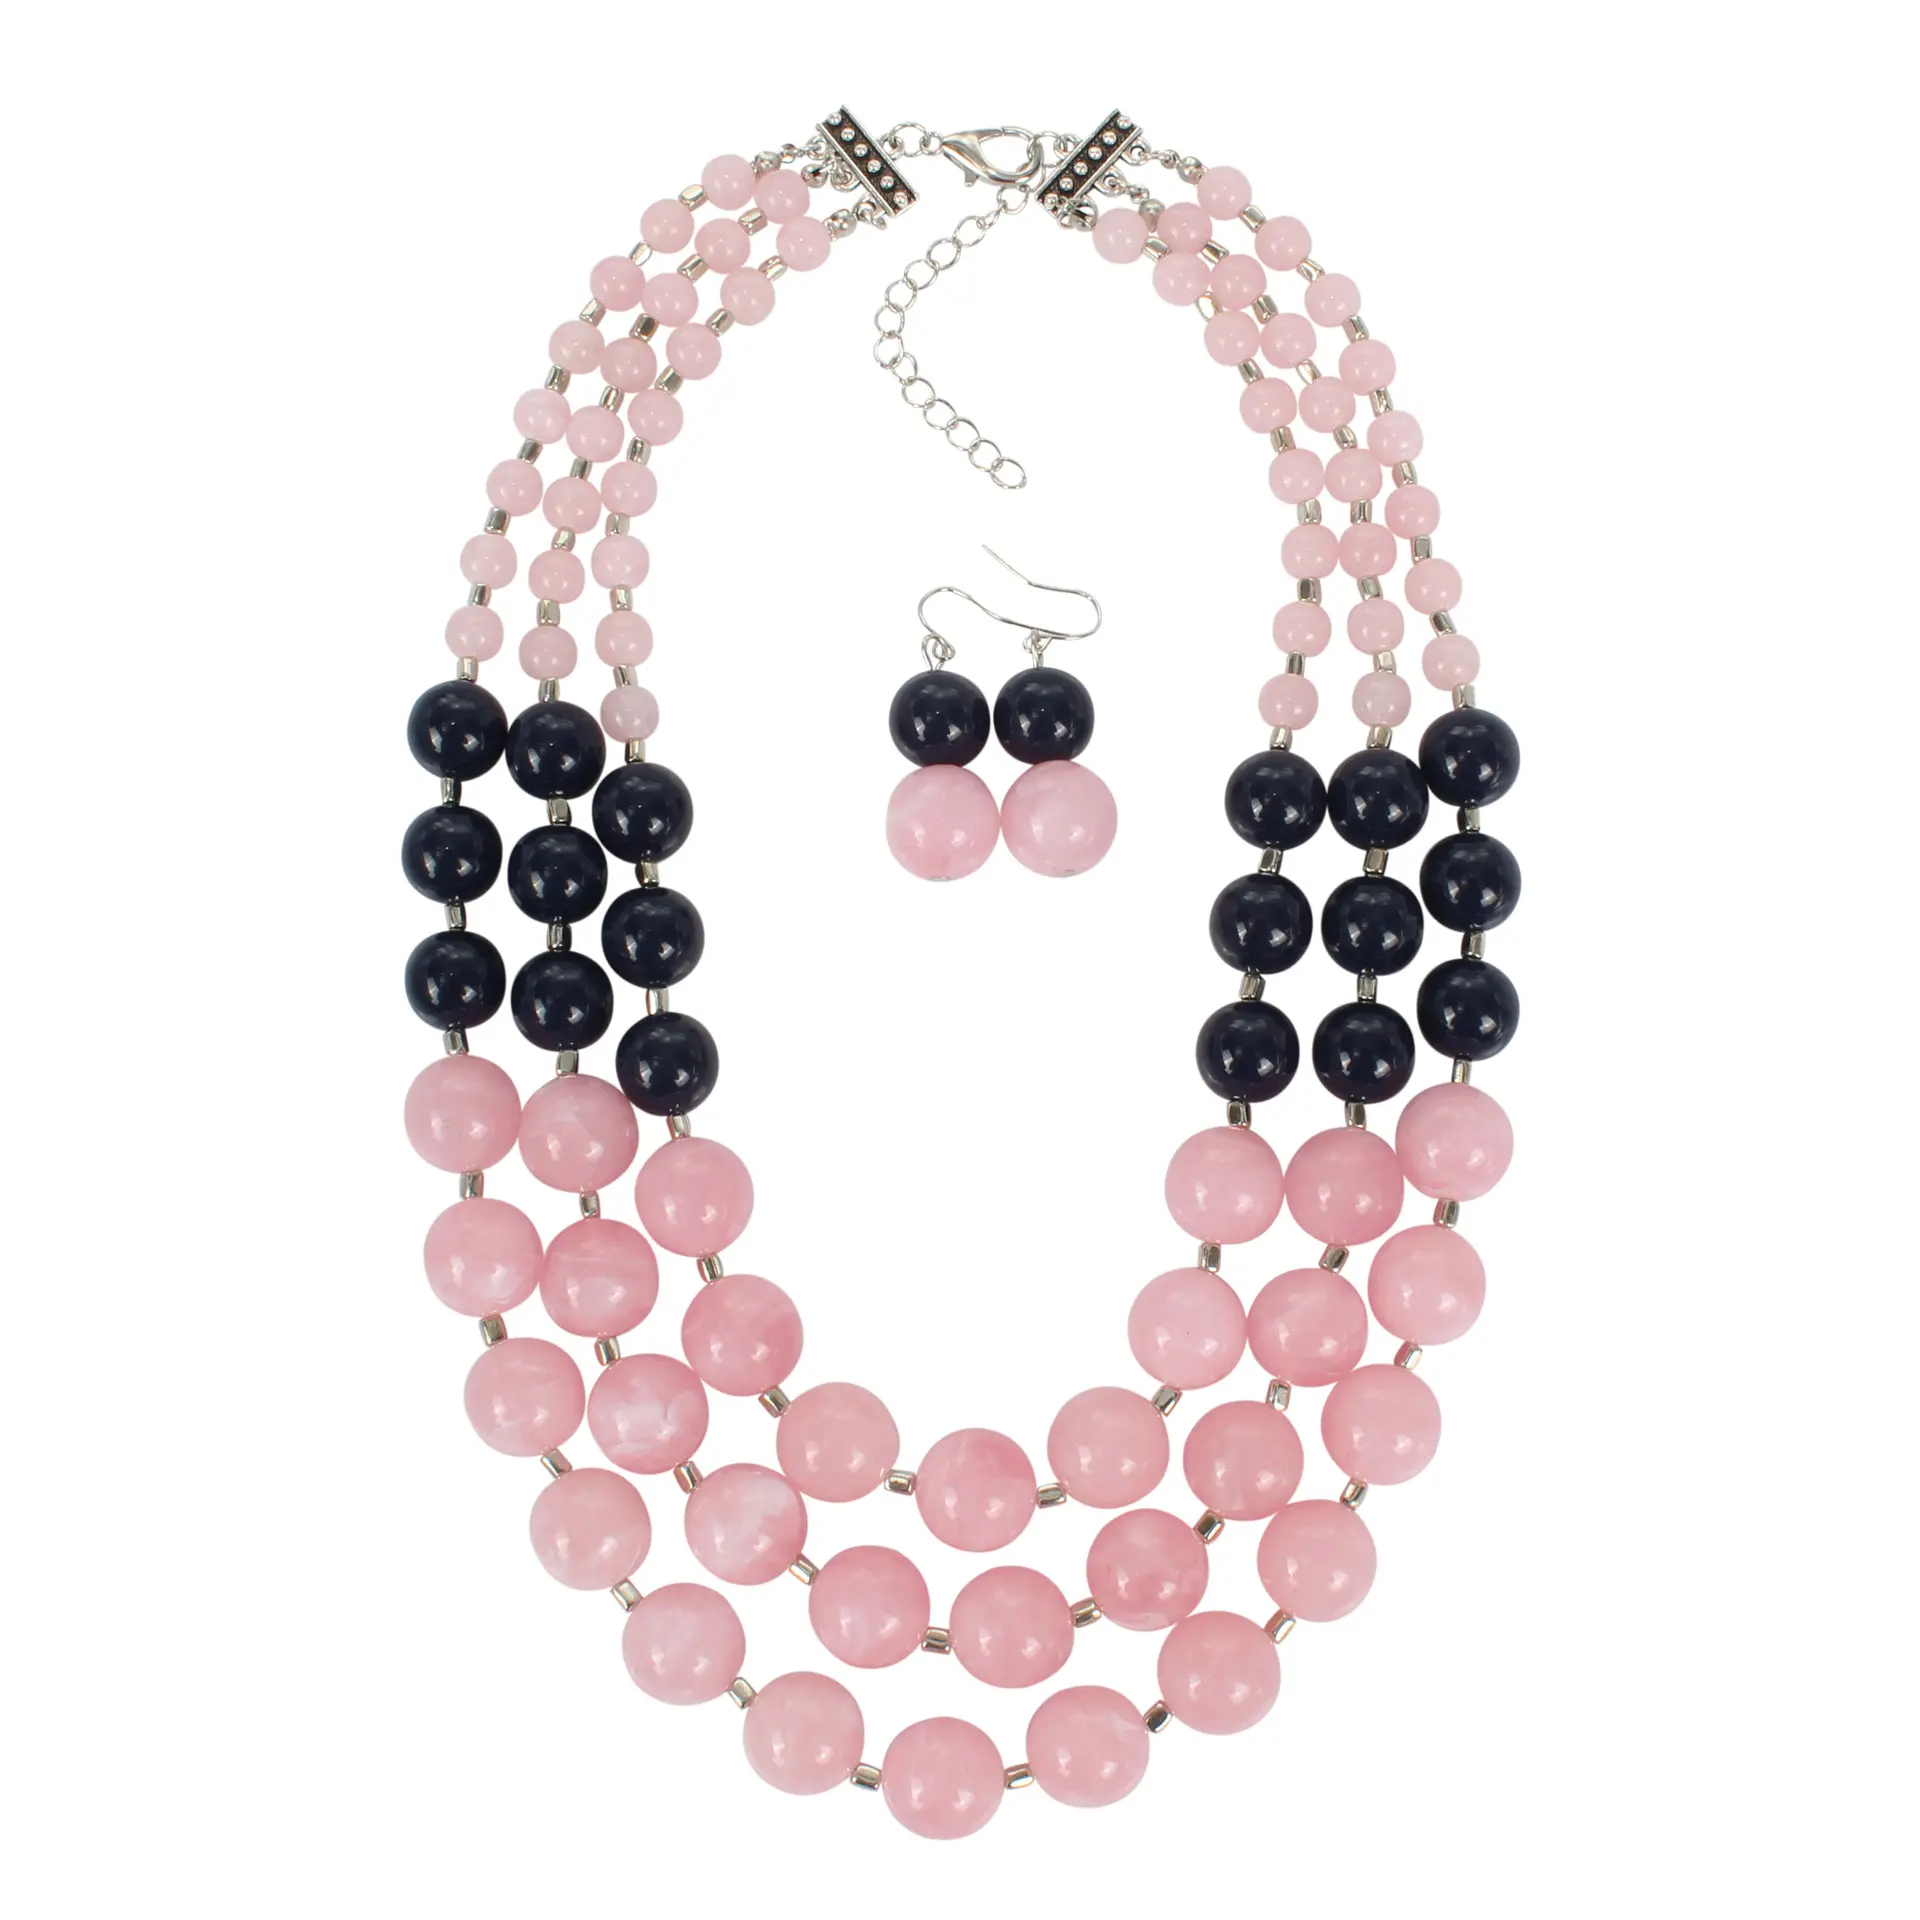 New Arrival Resin Beads Statement Wedding Bridal Alloy Necklace Jewelry Set For Women